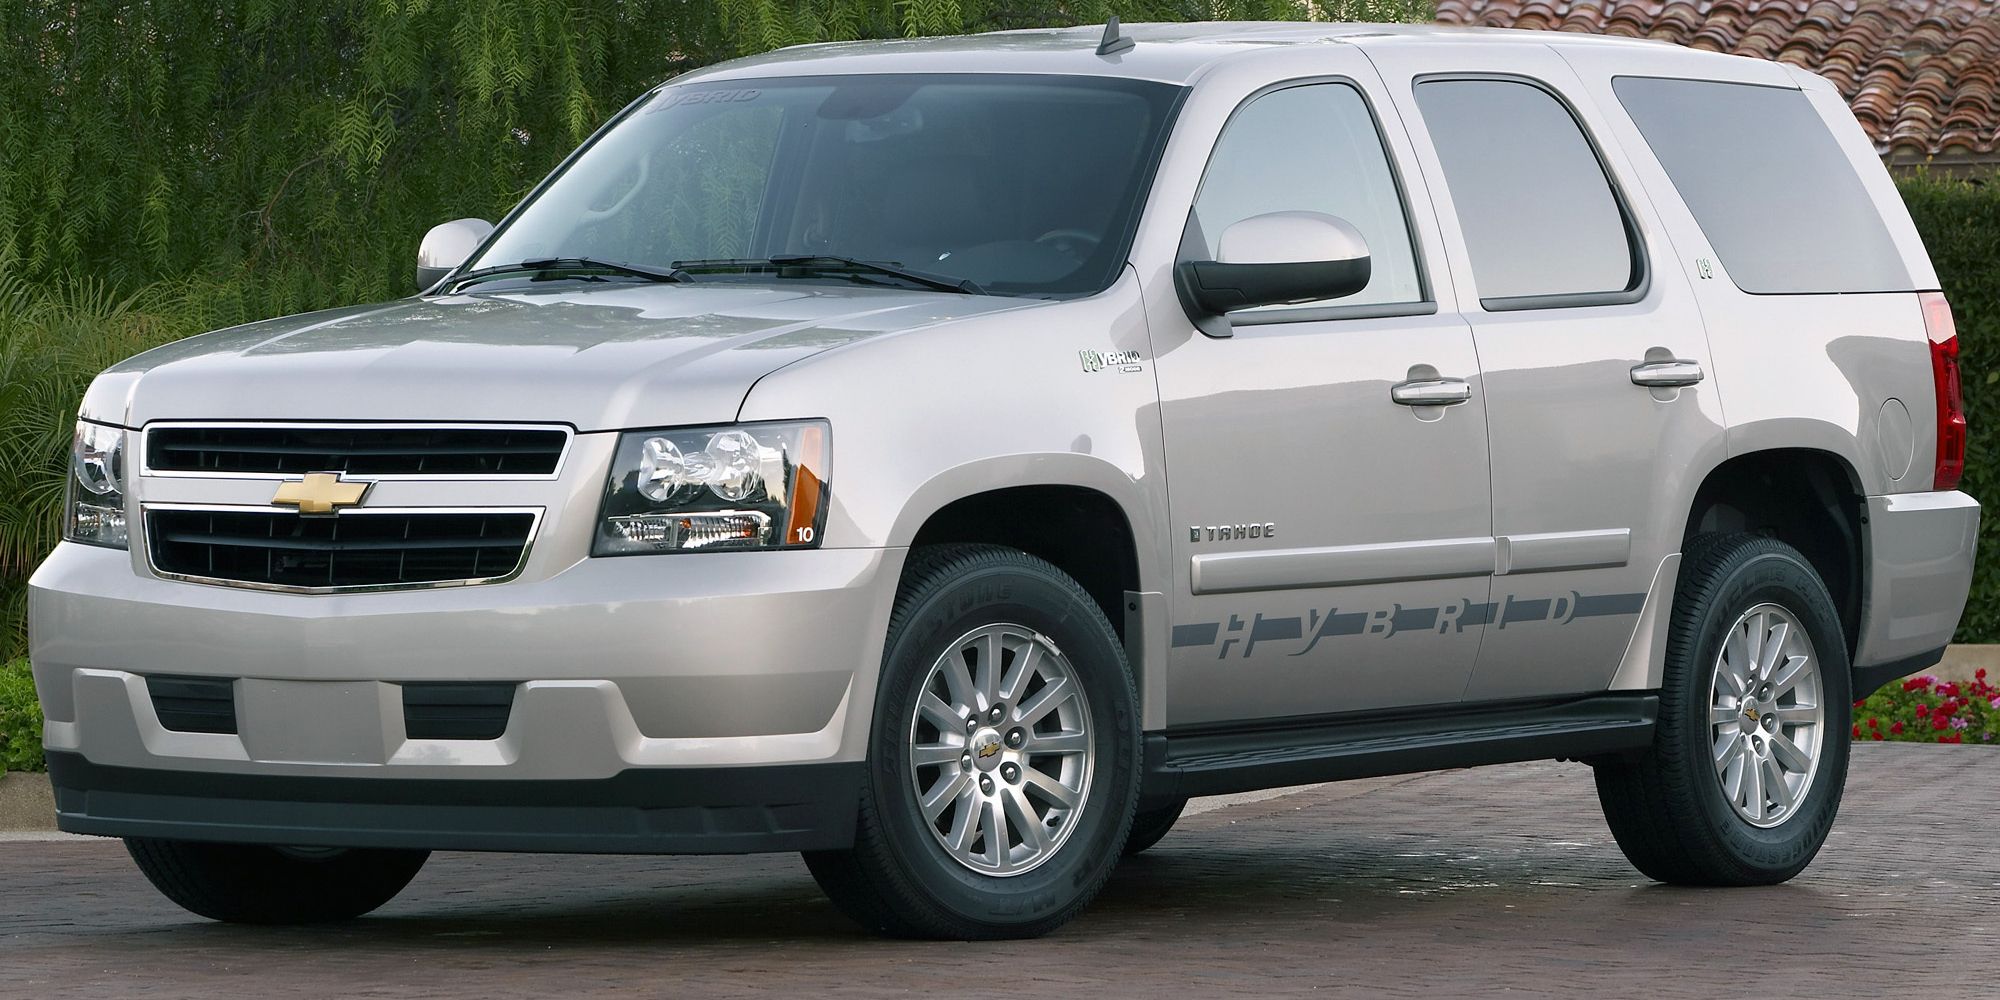 Front 3/4 view of the Tahoe Hybrid